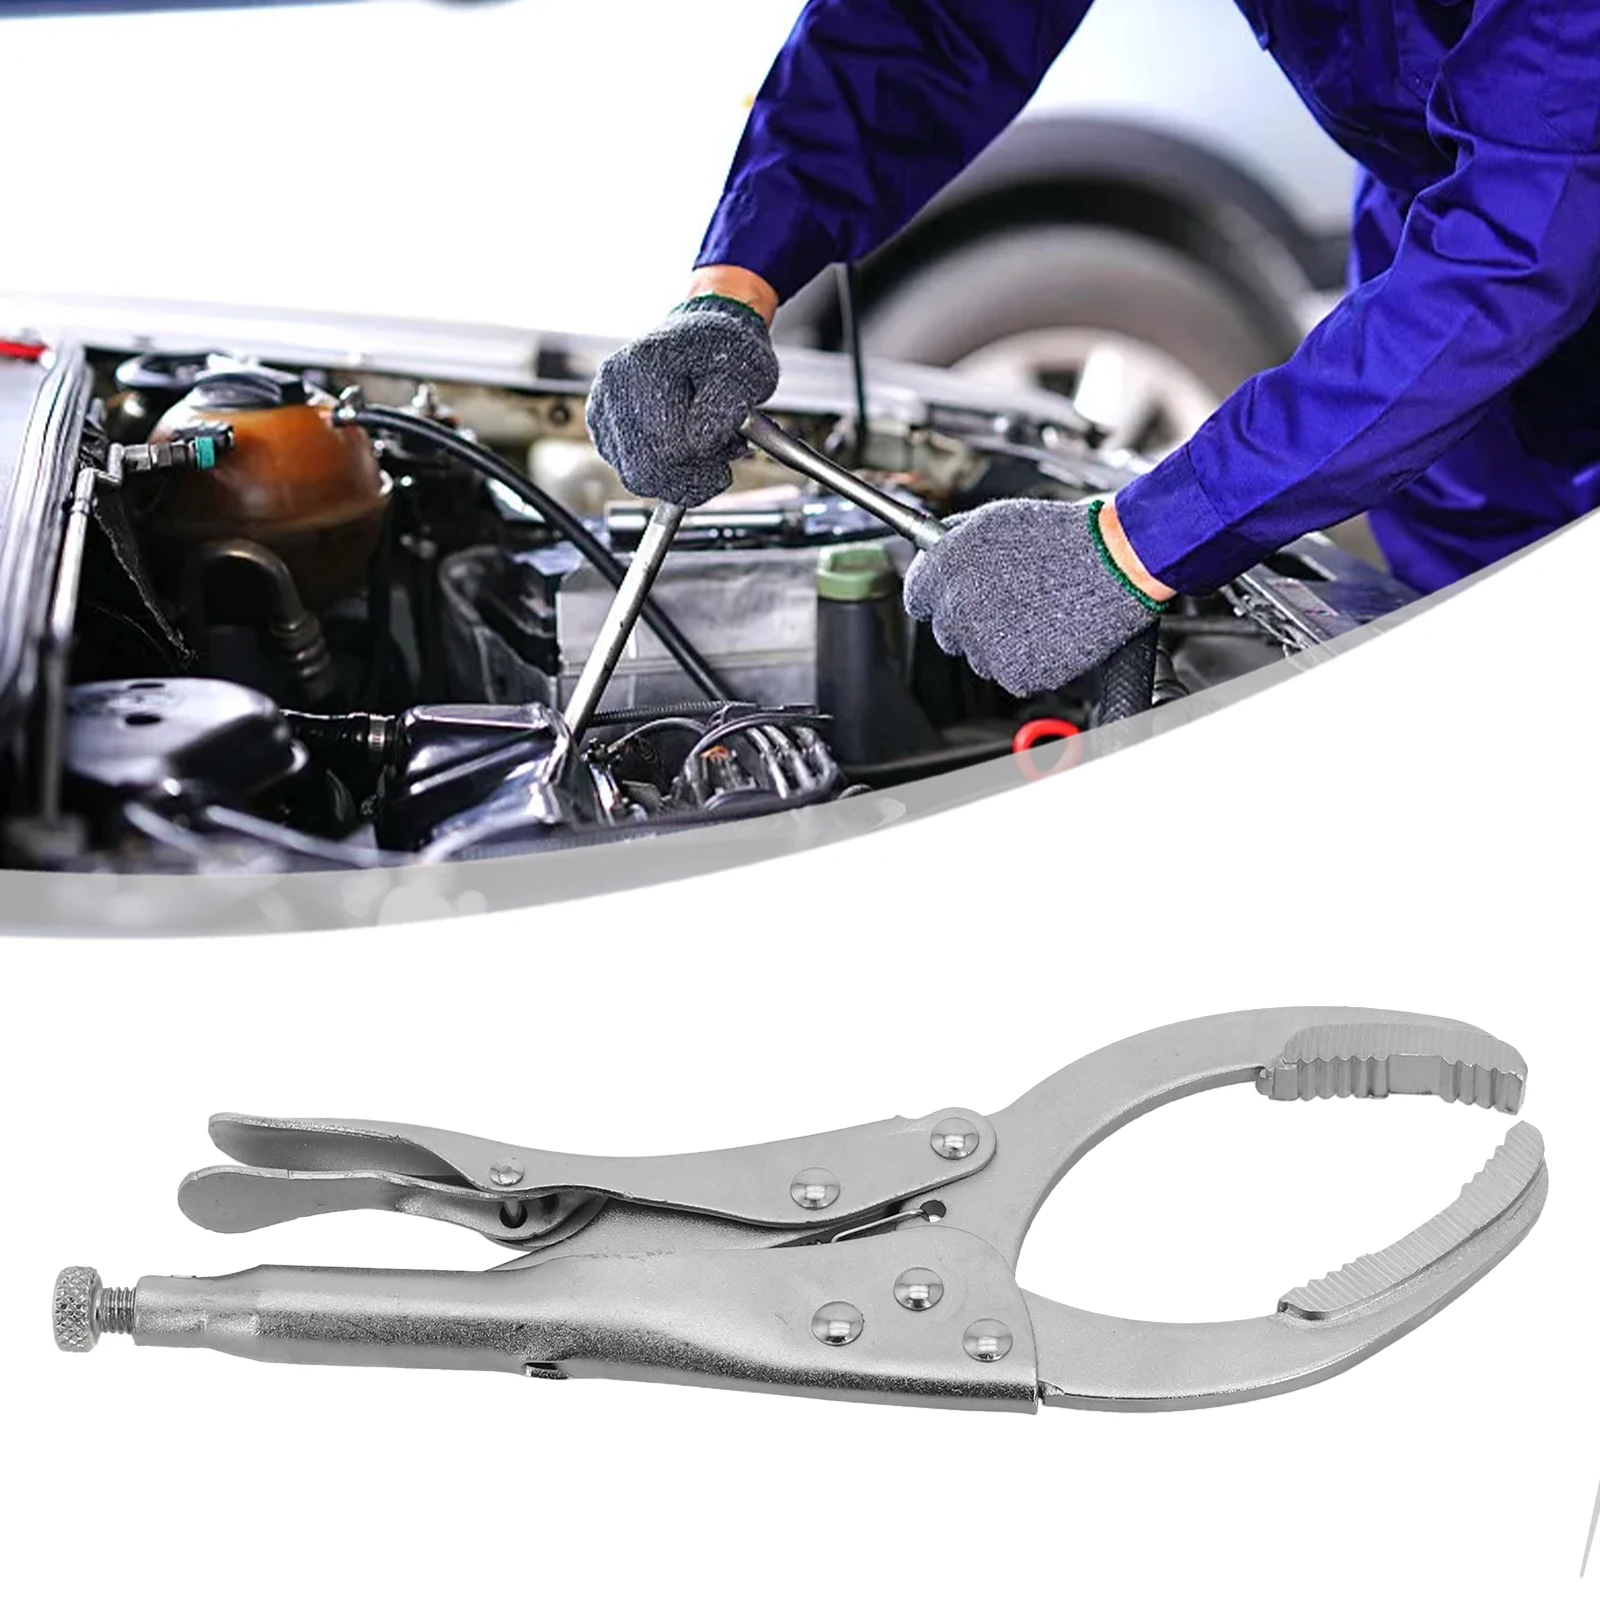 

Adjustable Locking Oil Filter Pliers Wrench Vise Style Grip Oil Filter Remover Plier Steel Automotive Disassembly Manual Tool